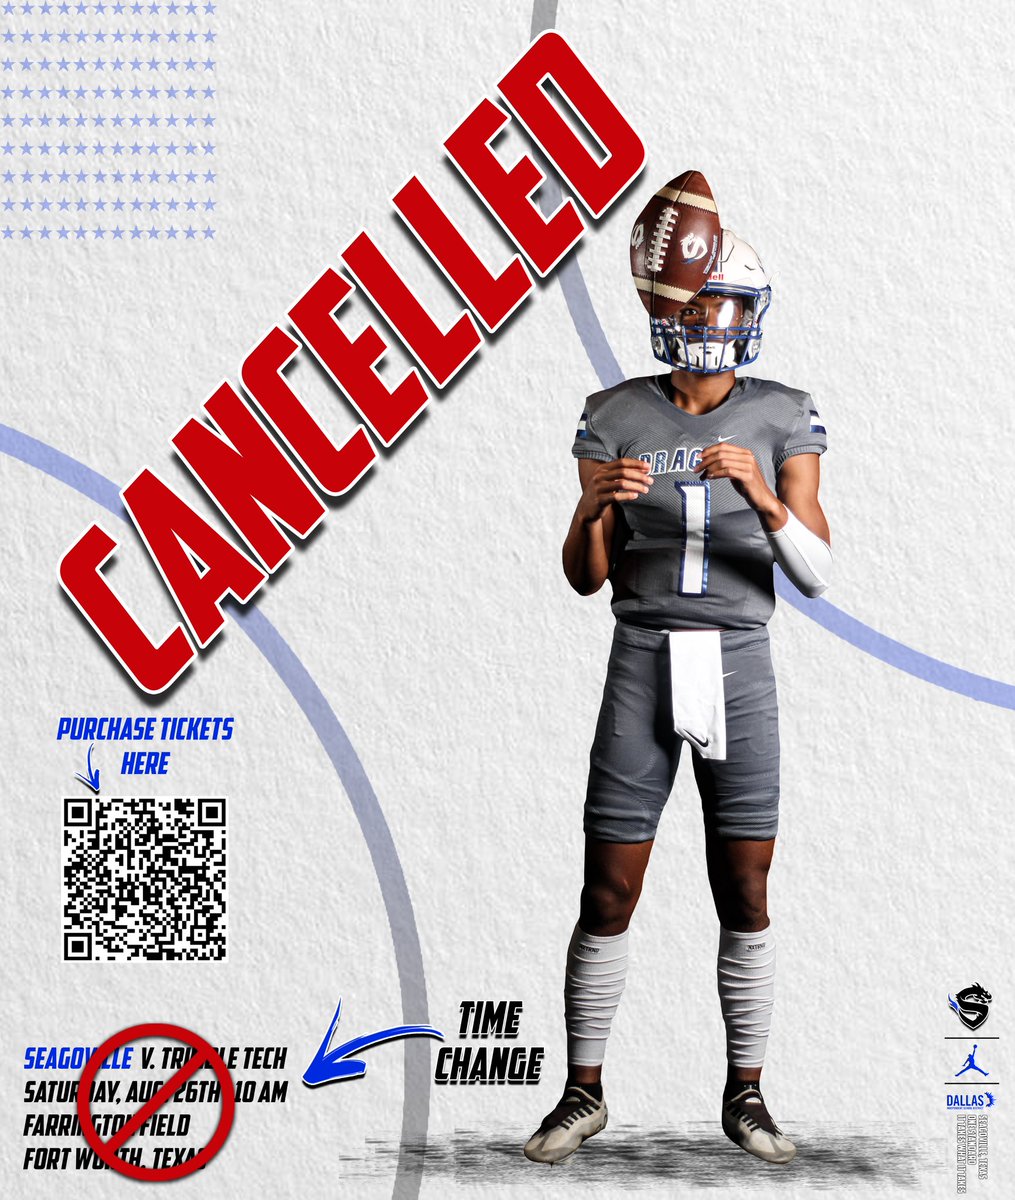 Our game tomorrow has cancelled and we will be given a 1-0 forfeit due to unforeseen circumstances out of our control. #OneStandard #ITWIT